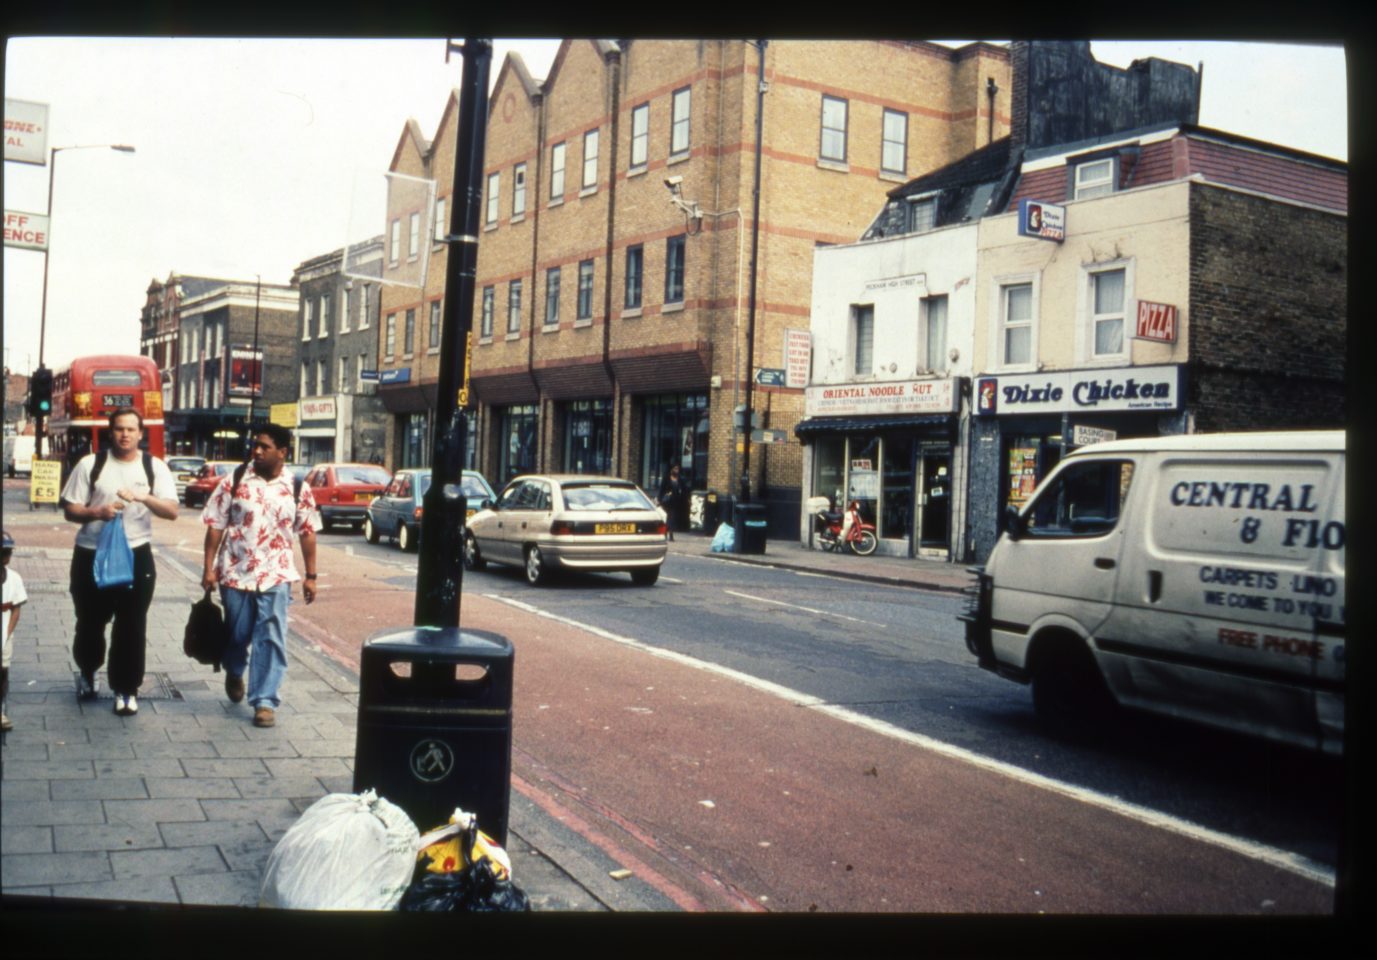 An old photograph of a road in Peckham. Cars and vans drive down the road and two men walk beside each other on the footpath.